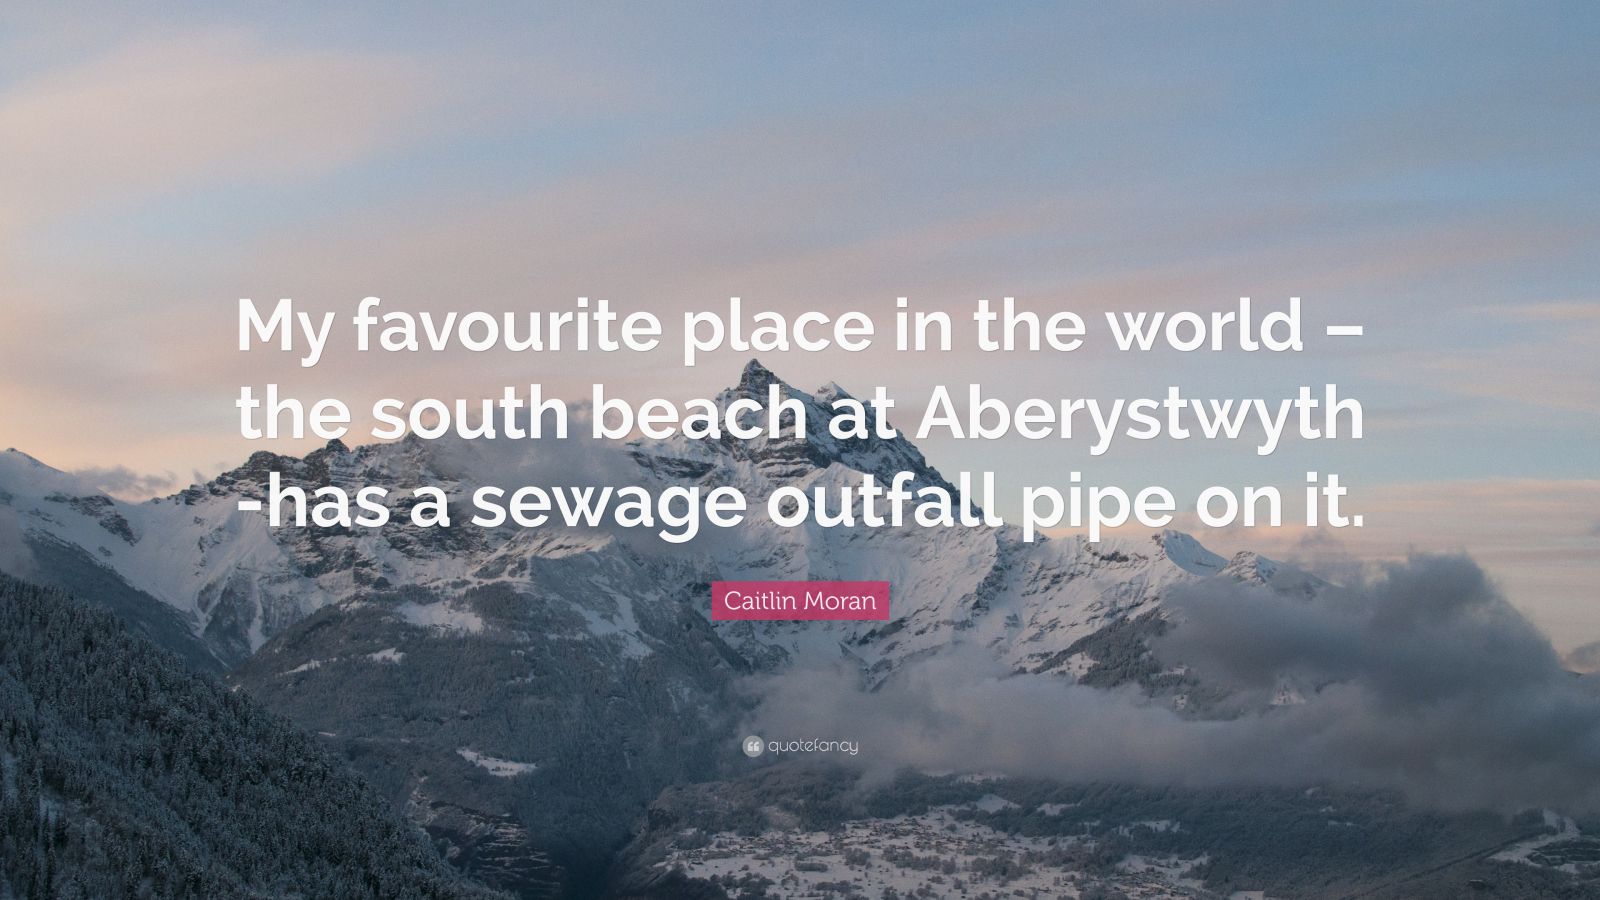 Caitlin Moran Quote “my Favourite Place In The World The South Beach At Aberystwyth Has A